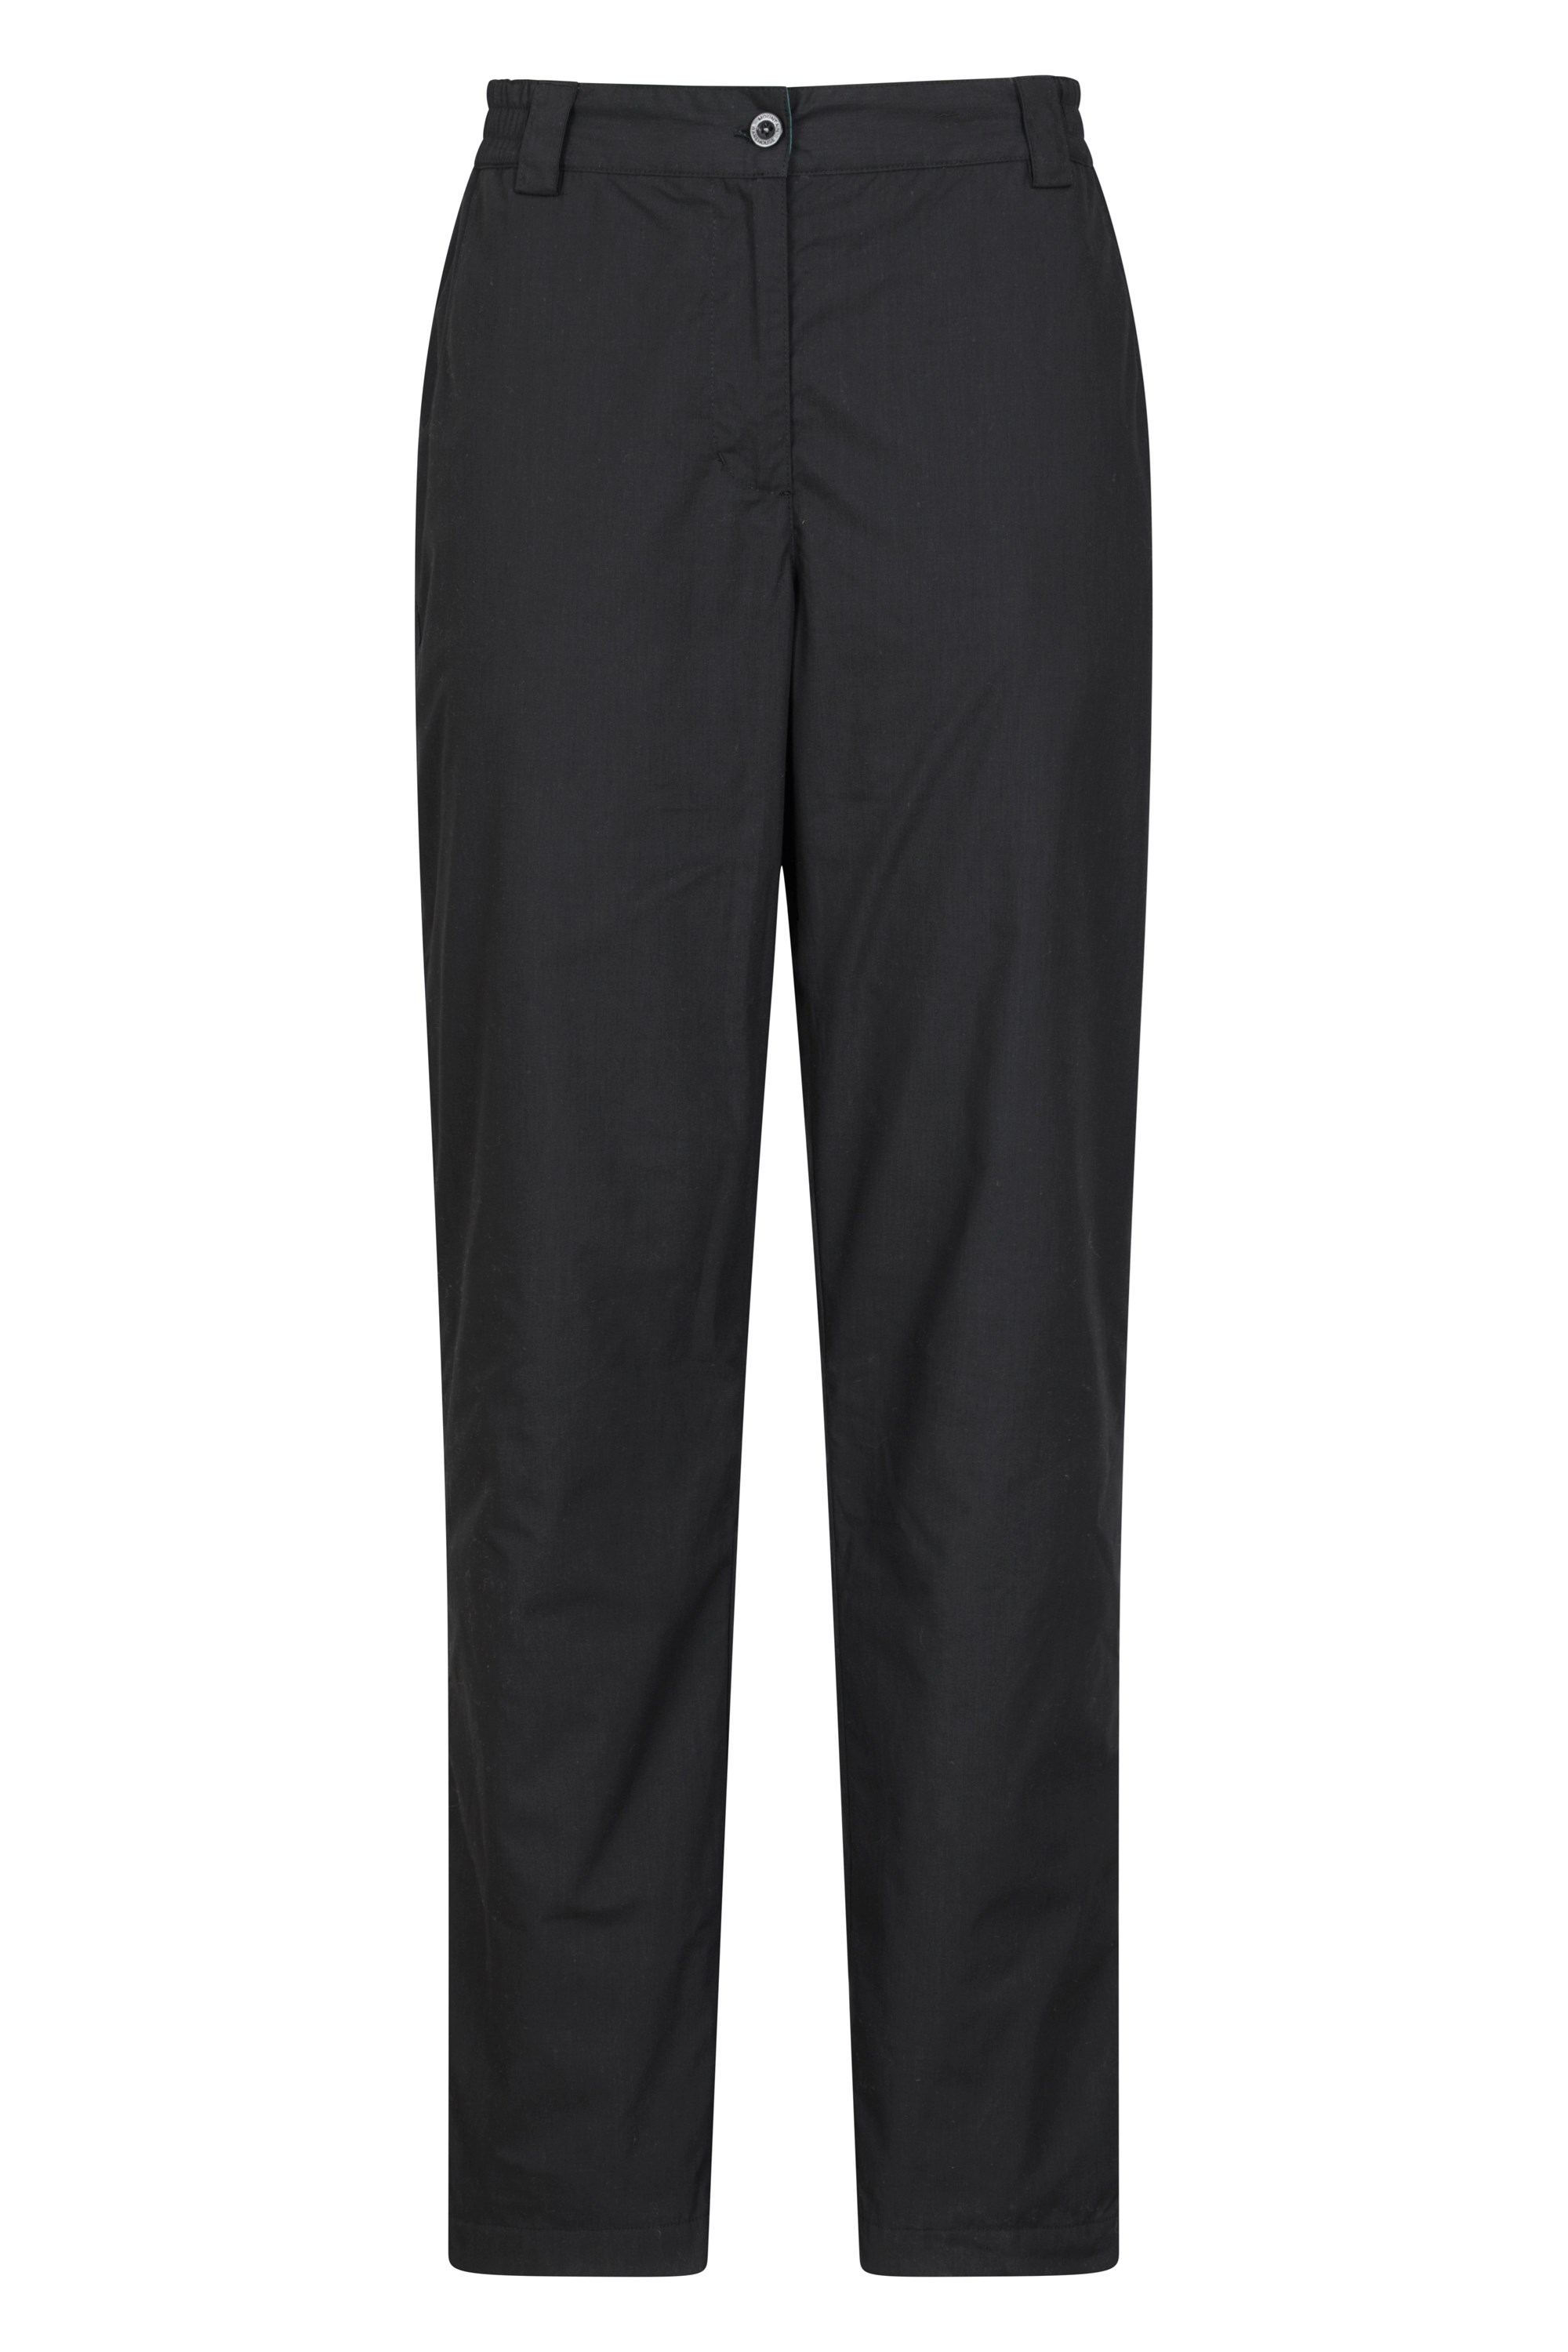 Discover more than 174 ladies fleece lined trousers